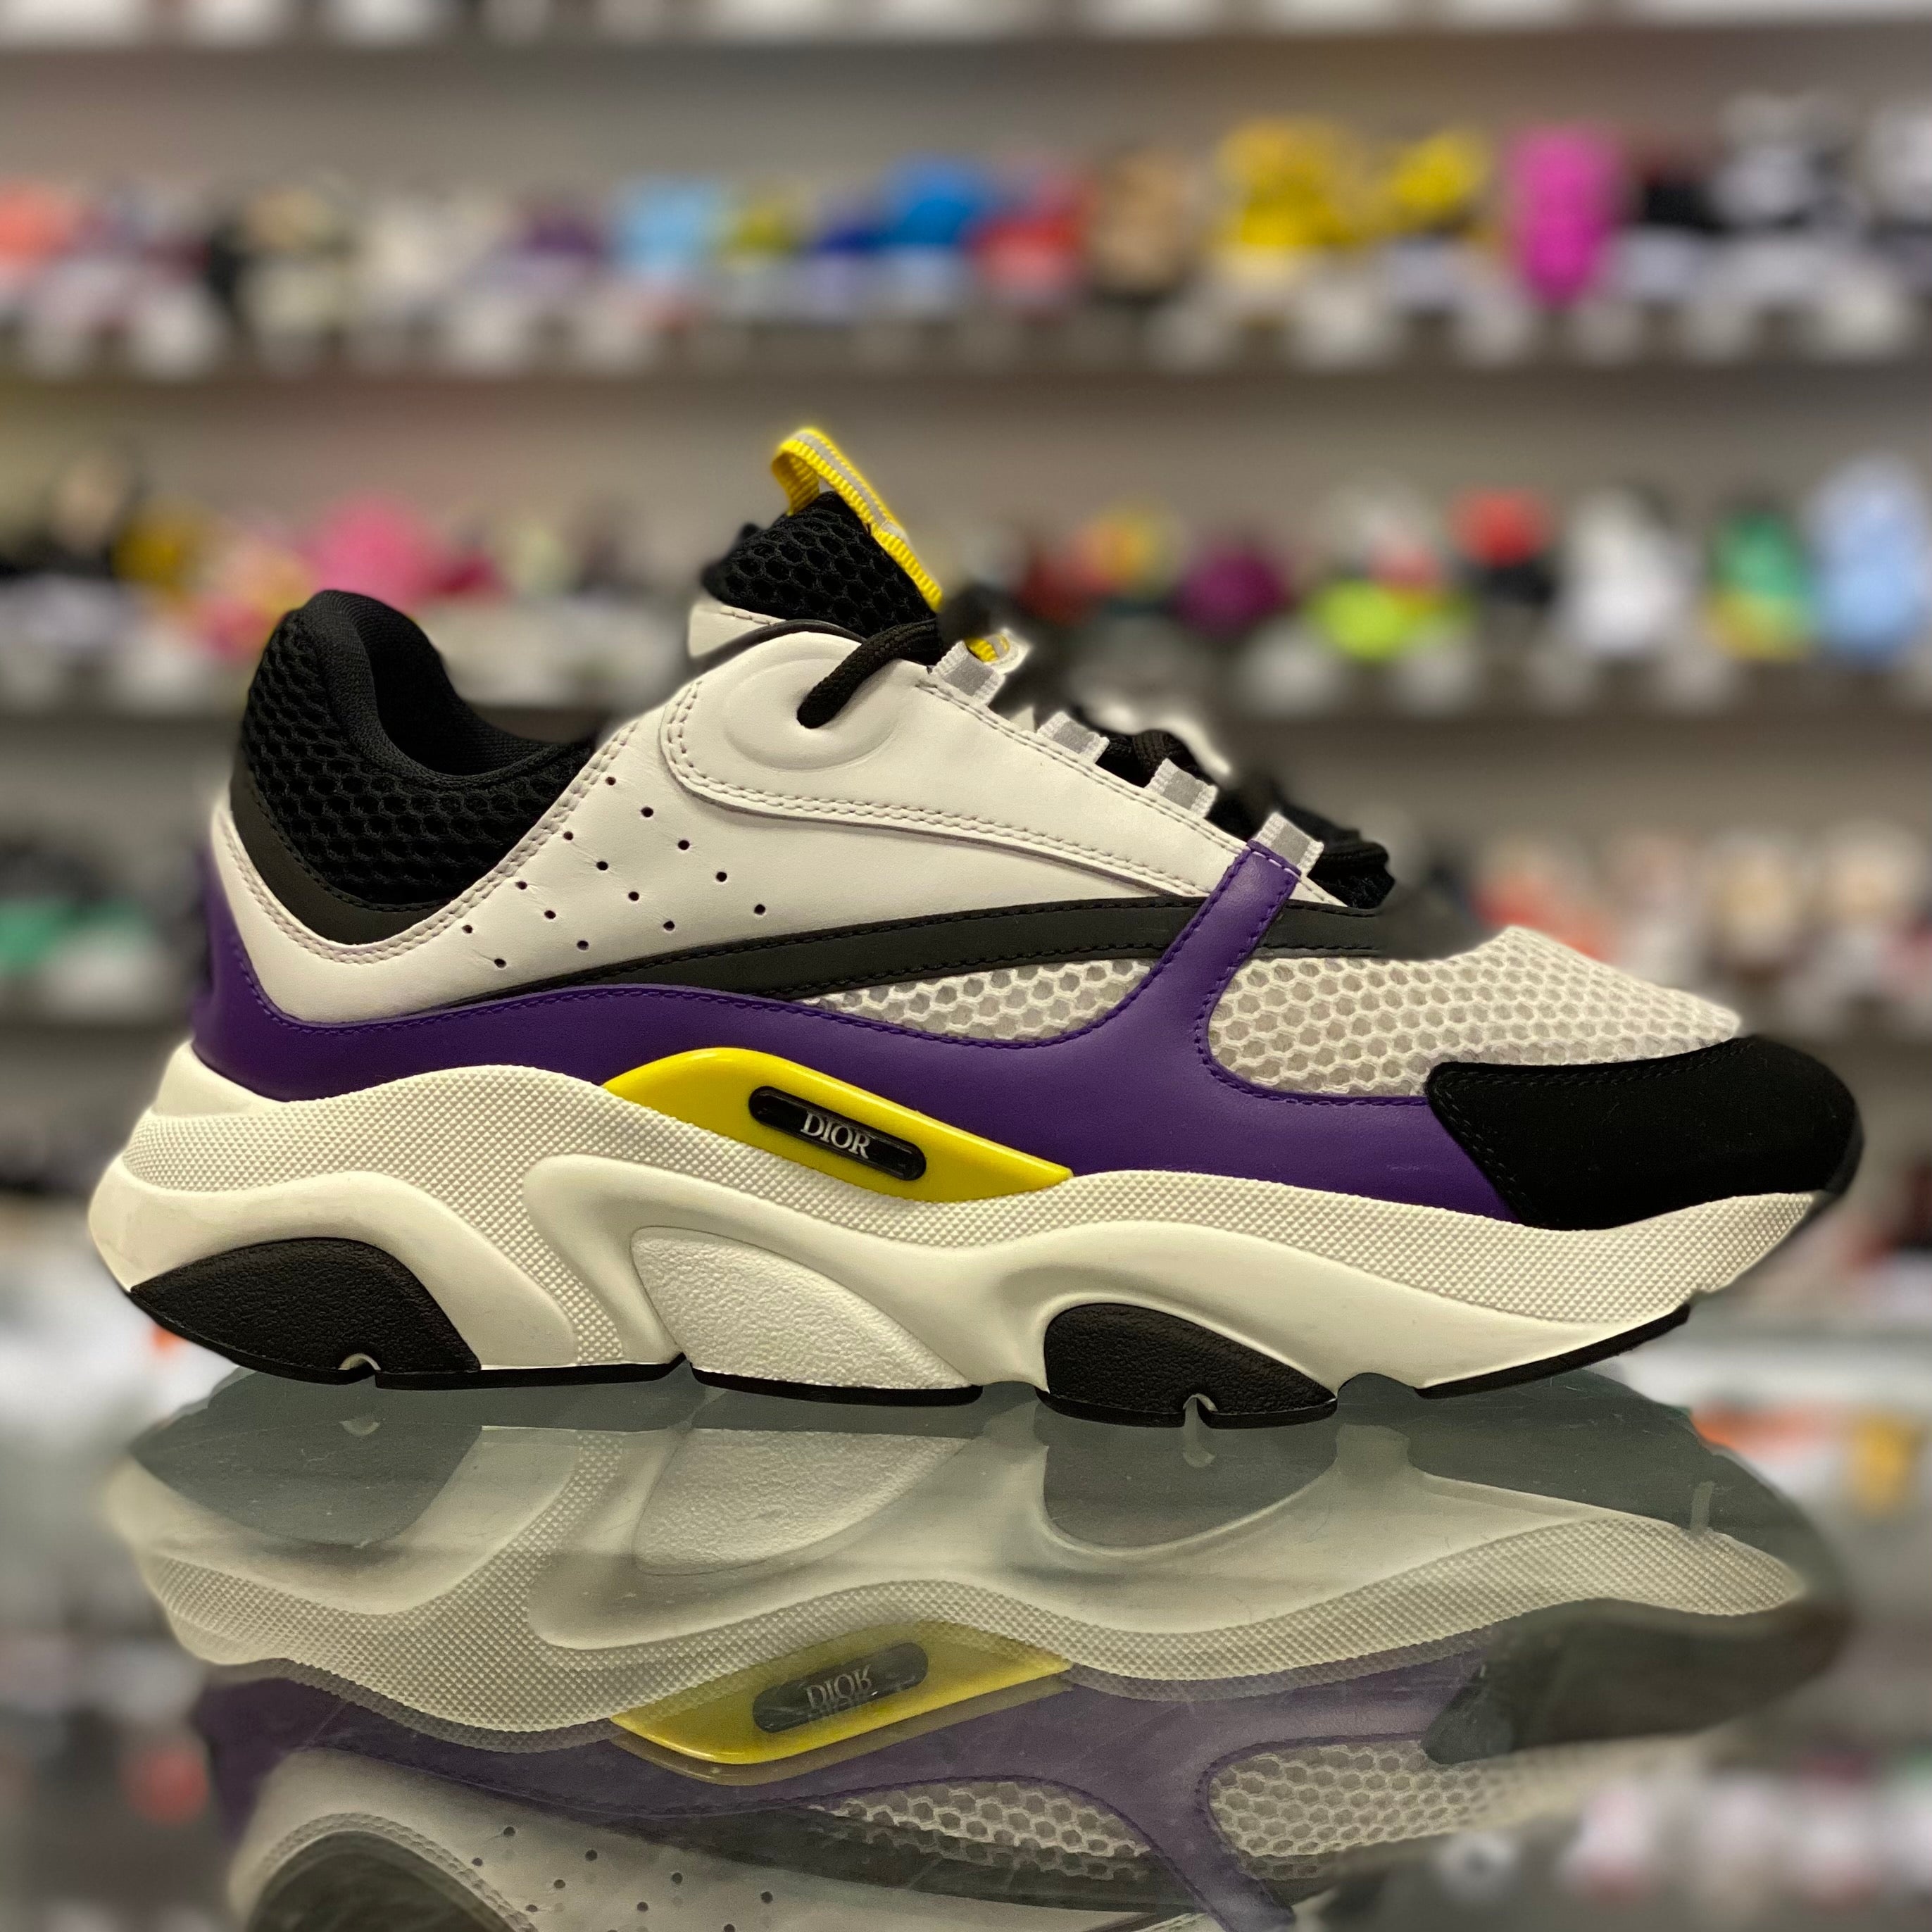 Dior B22 “Violet White” Lakers